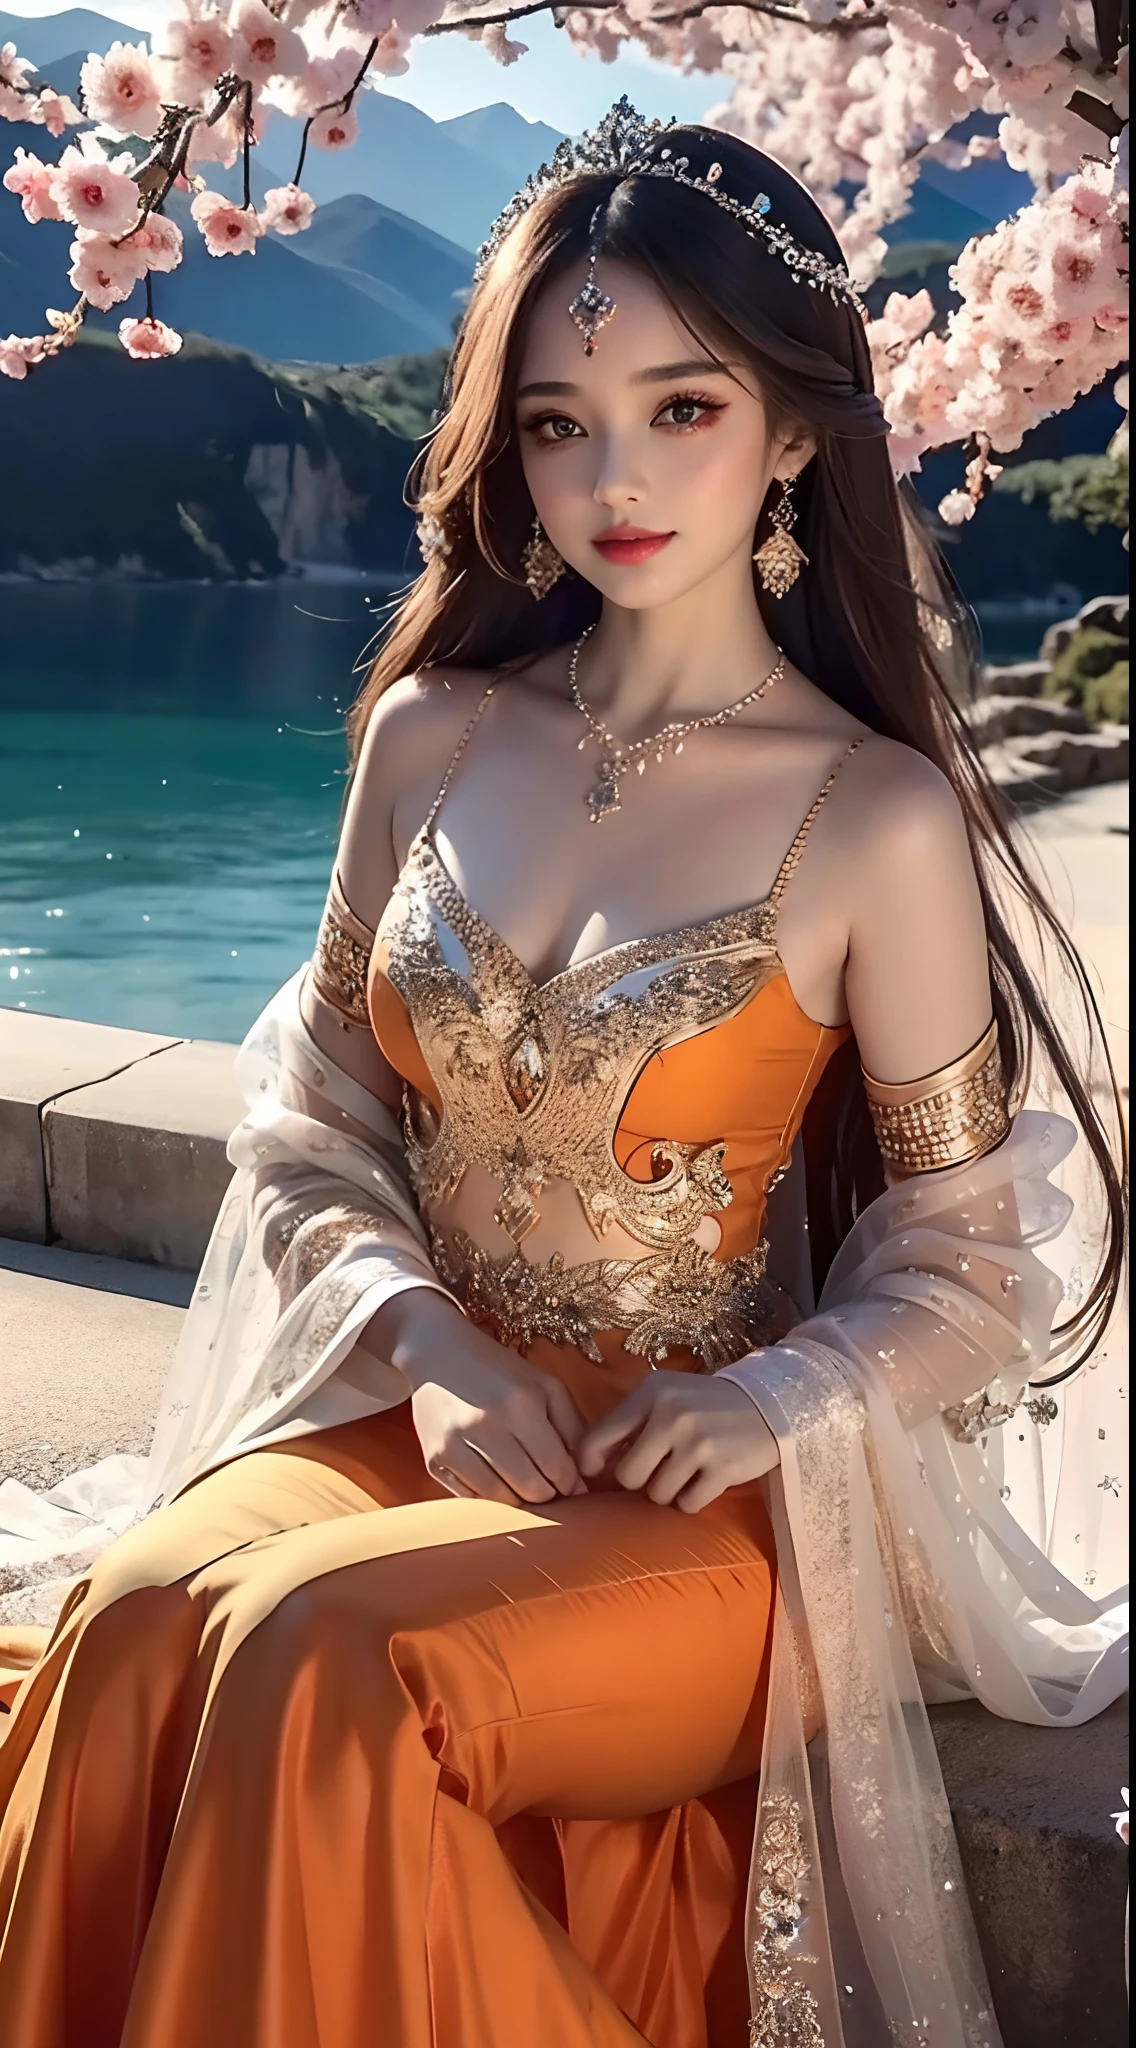 4K Ultra HD, Masterpiece, Cute  s, Nice face, Detailed Eyes, Liquid Lipstick, Long hair, Hair spreading, necklaces, beautiful dress, long dress, Wedding dresses, Orange color, highlights, lighting effects, glittering, realistic background, Natural background, blossom, sunlights, mountains, Full-body capture,